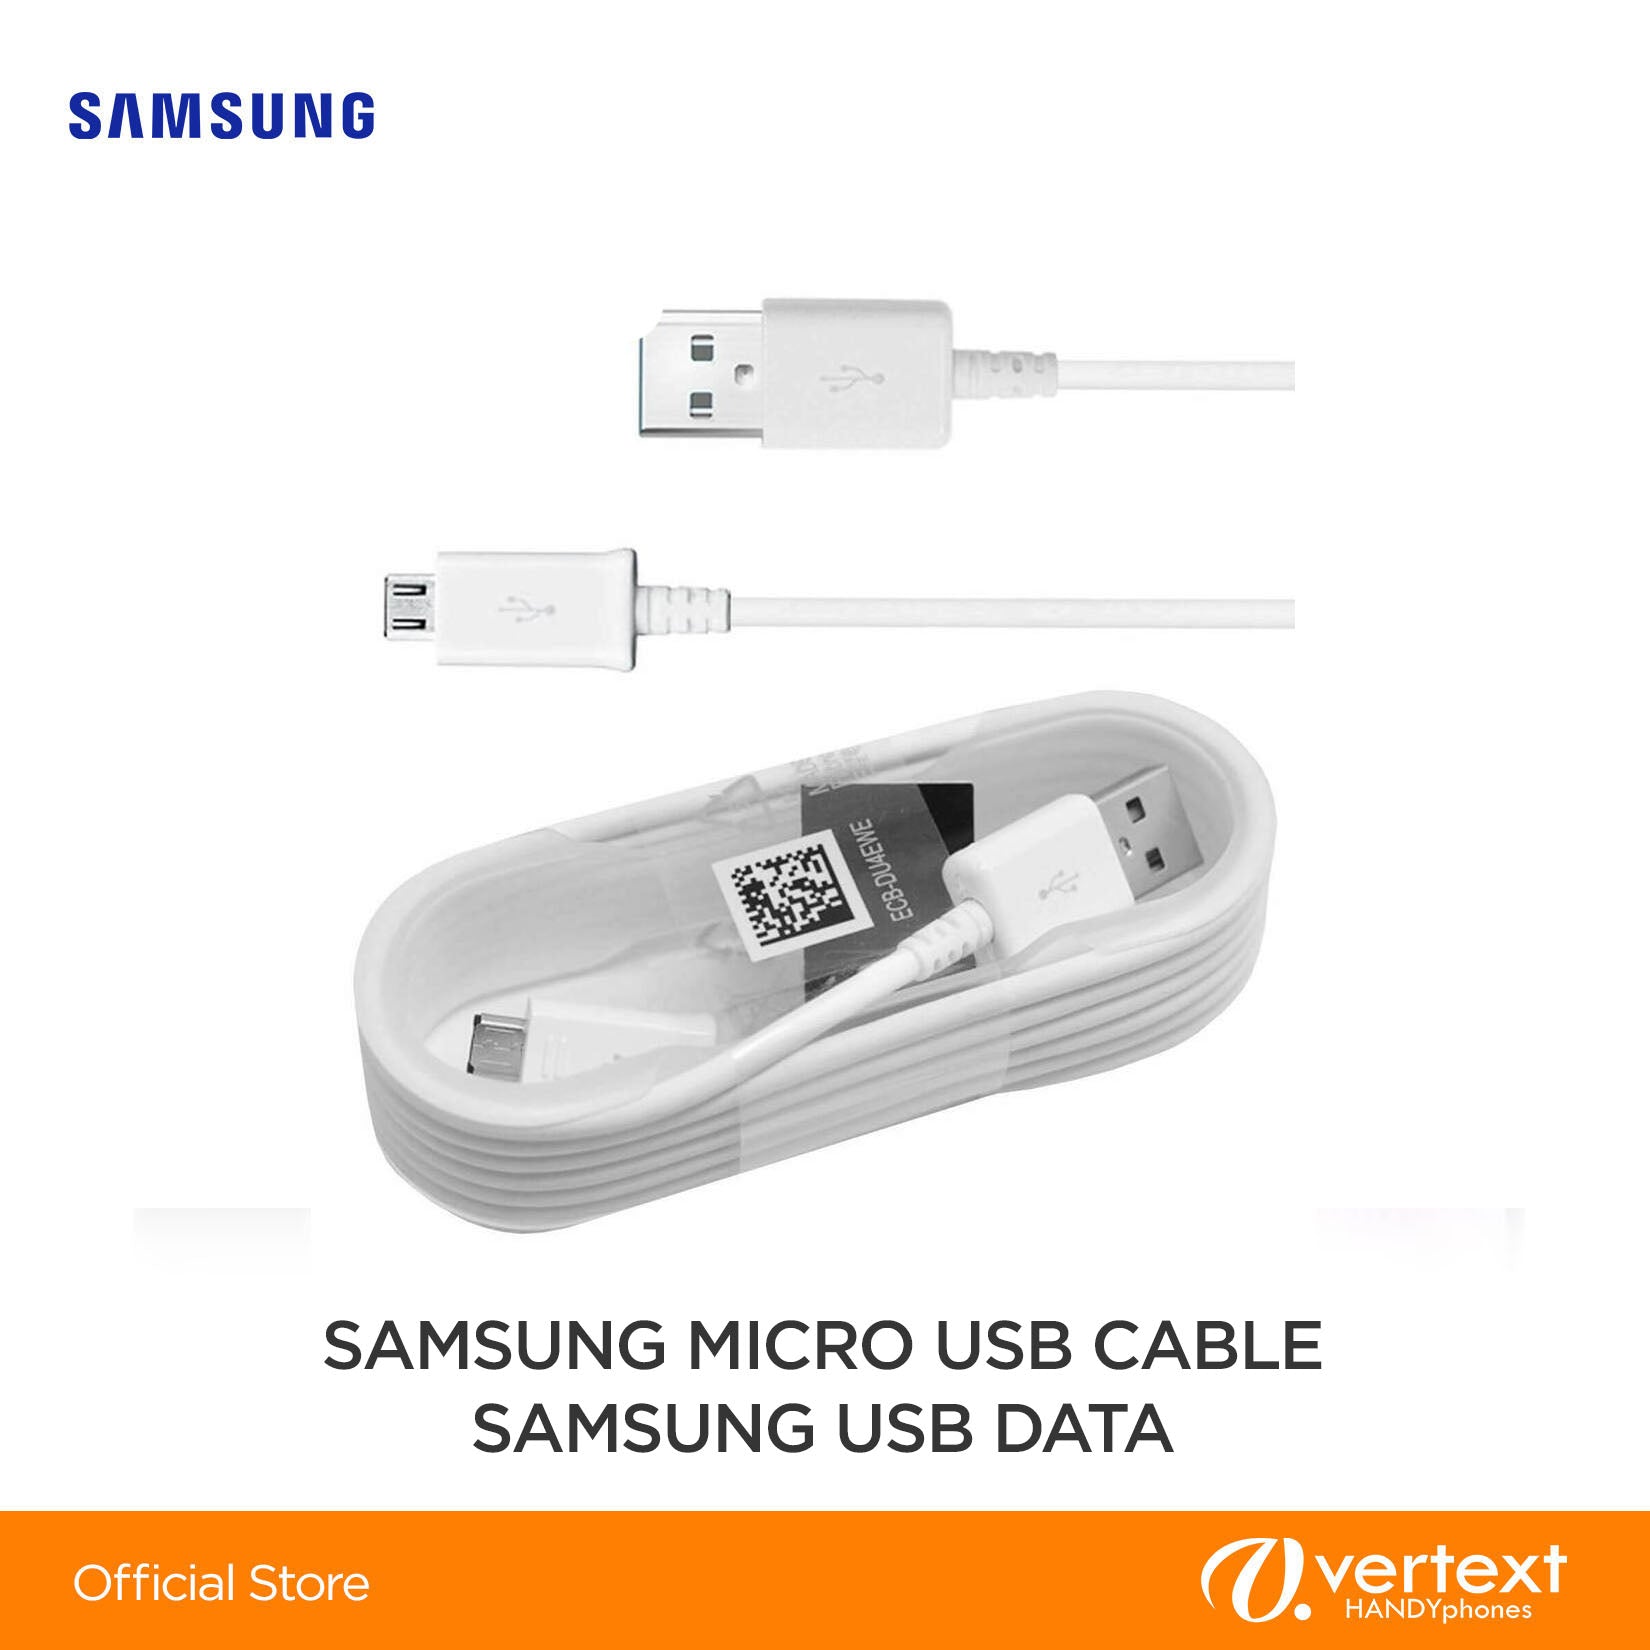 Samsung USB DATA CABLE USB A TO MICRO USB C CABLE